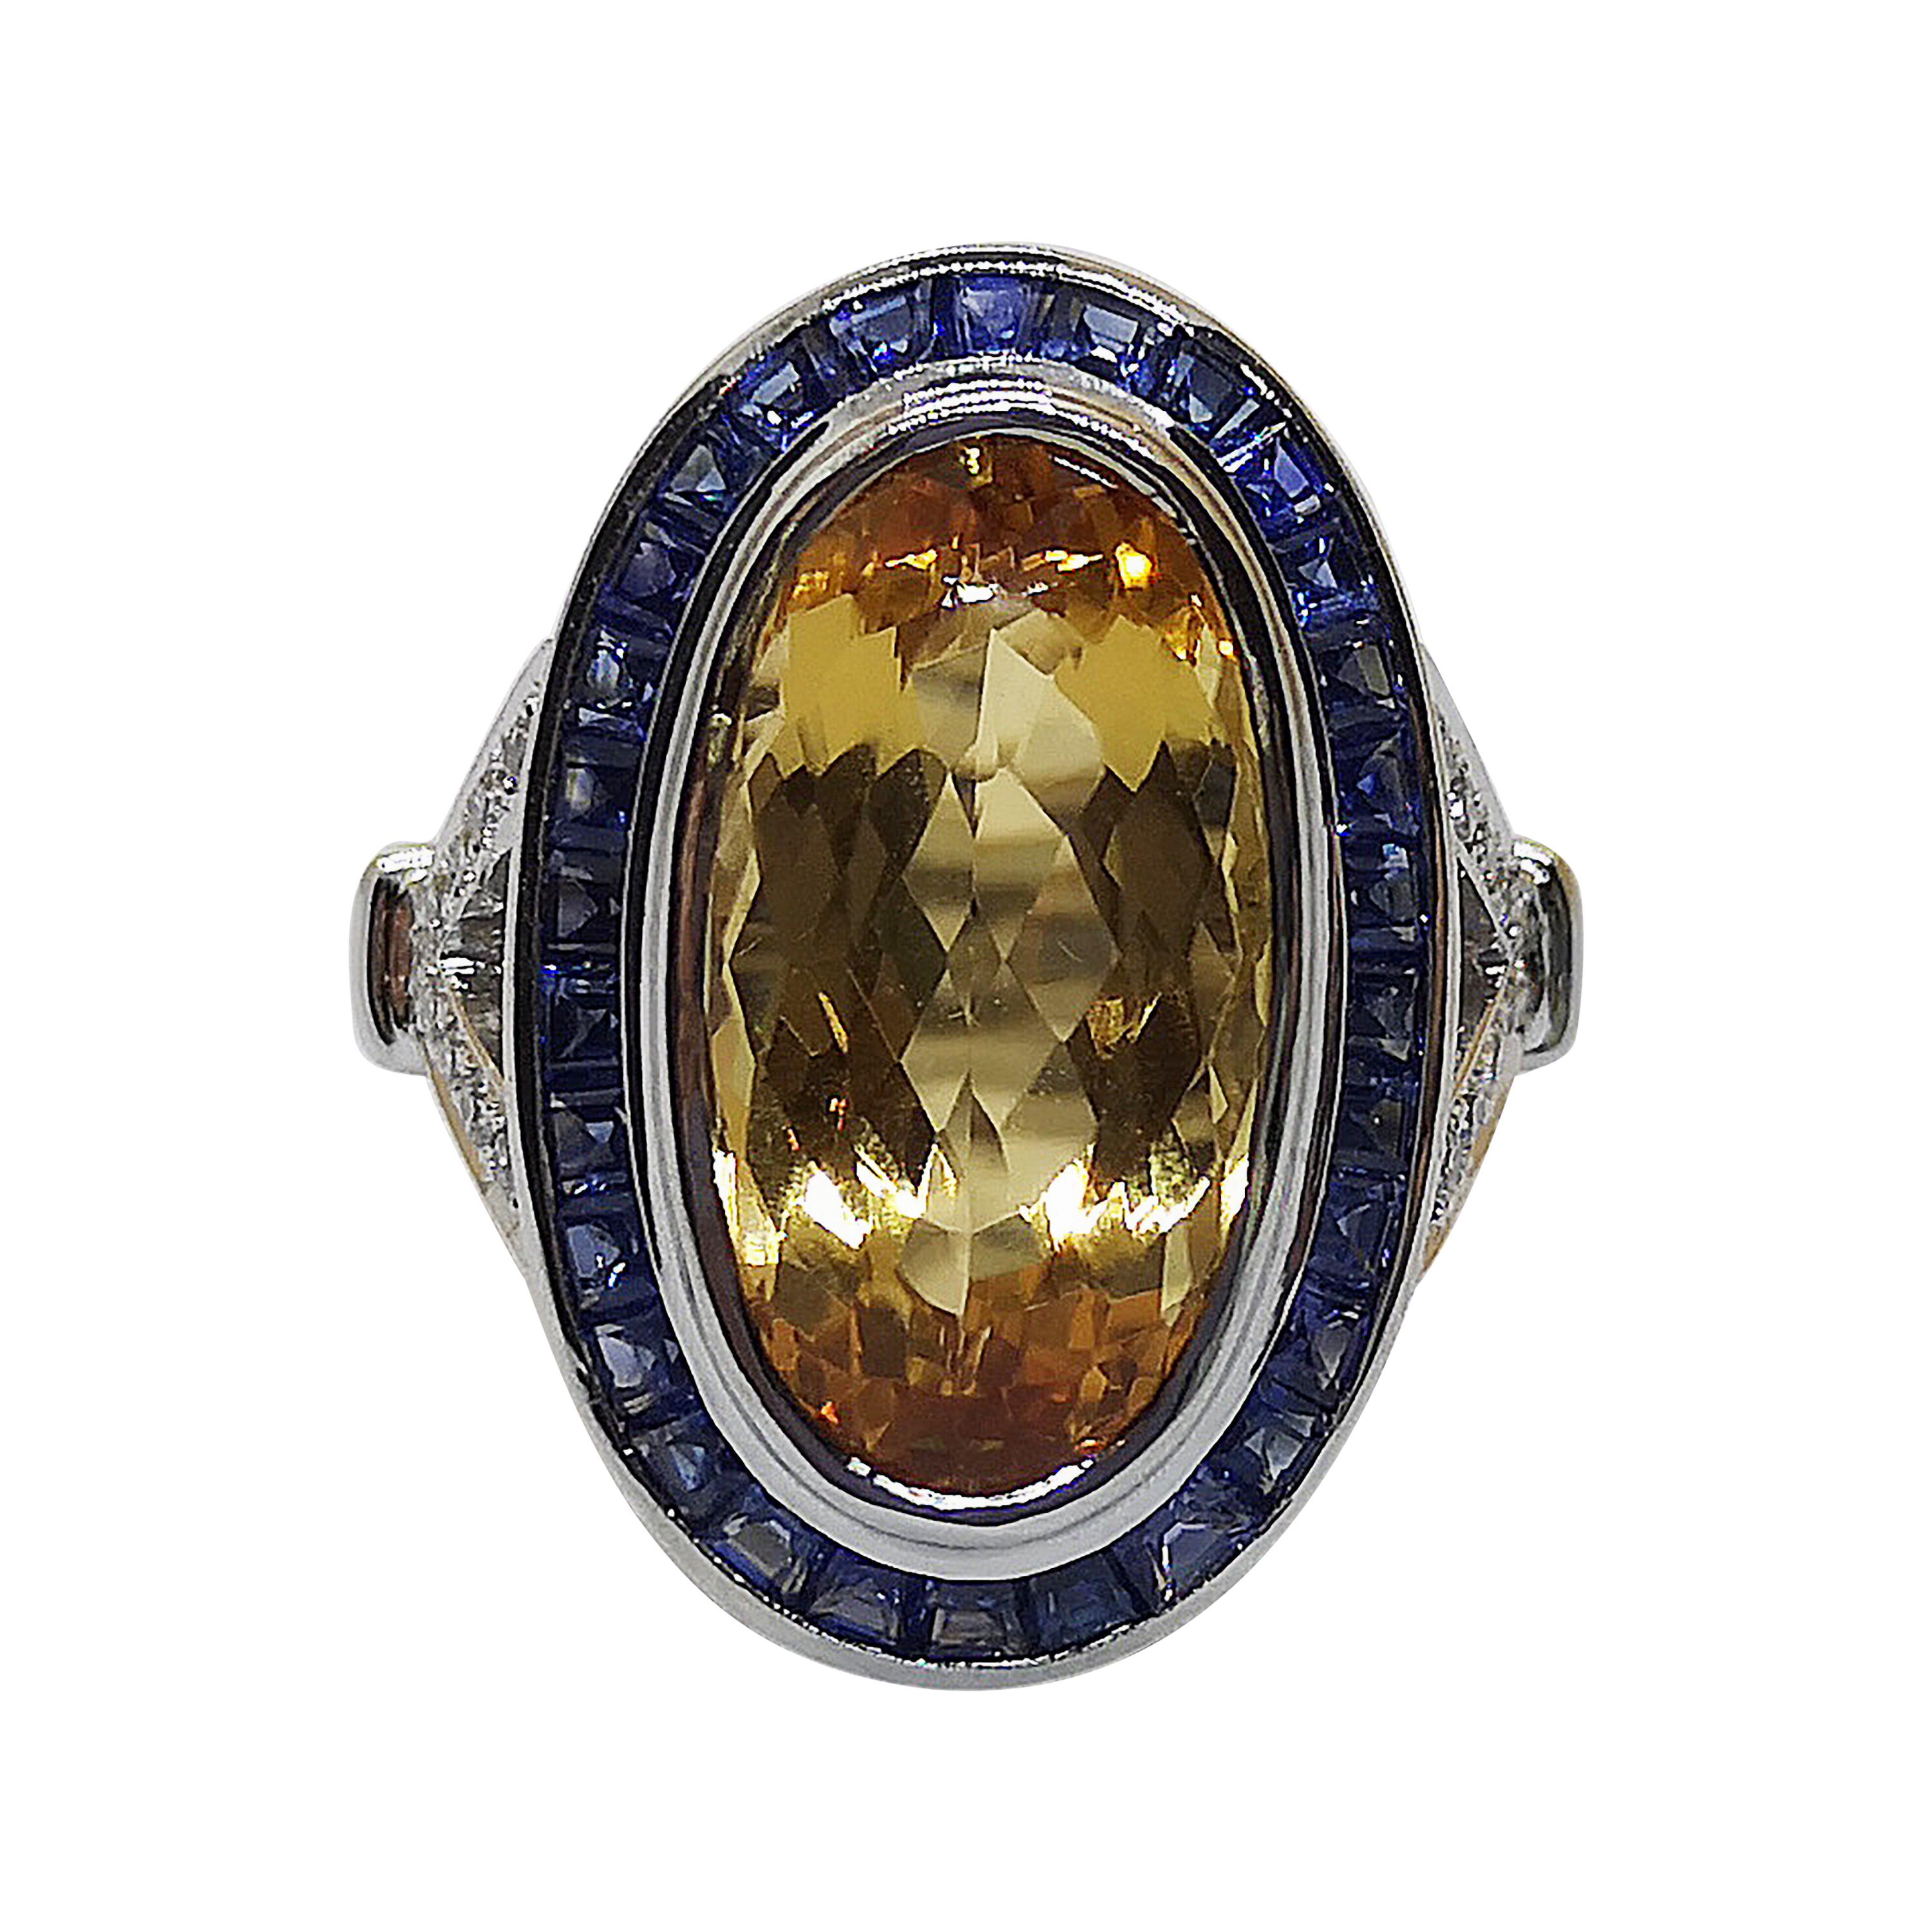 Movel Shape Imperial Topaz, Blue Sapphire and Diamond Ring in 18k White Gold